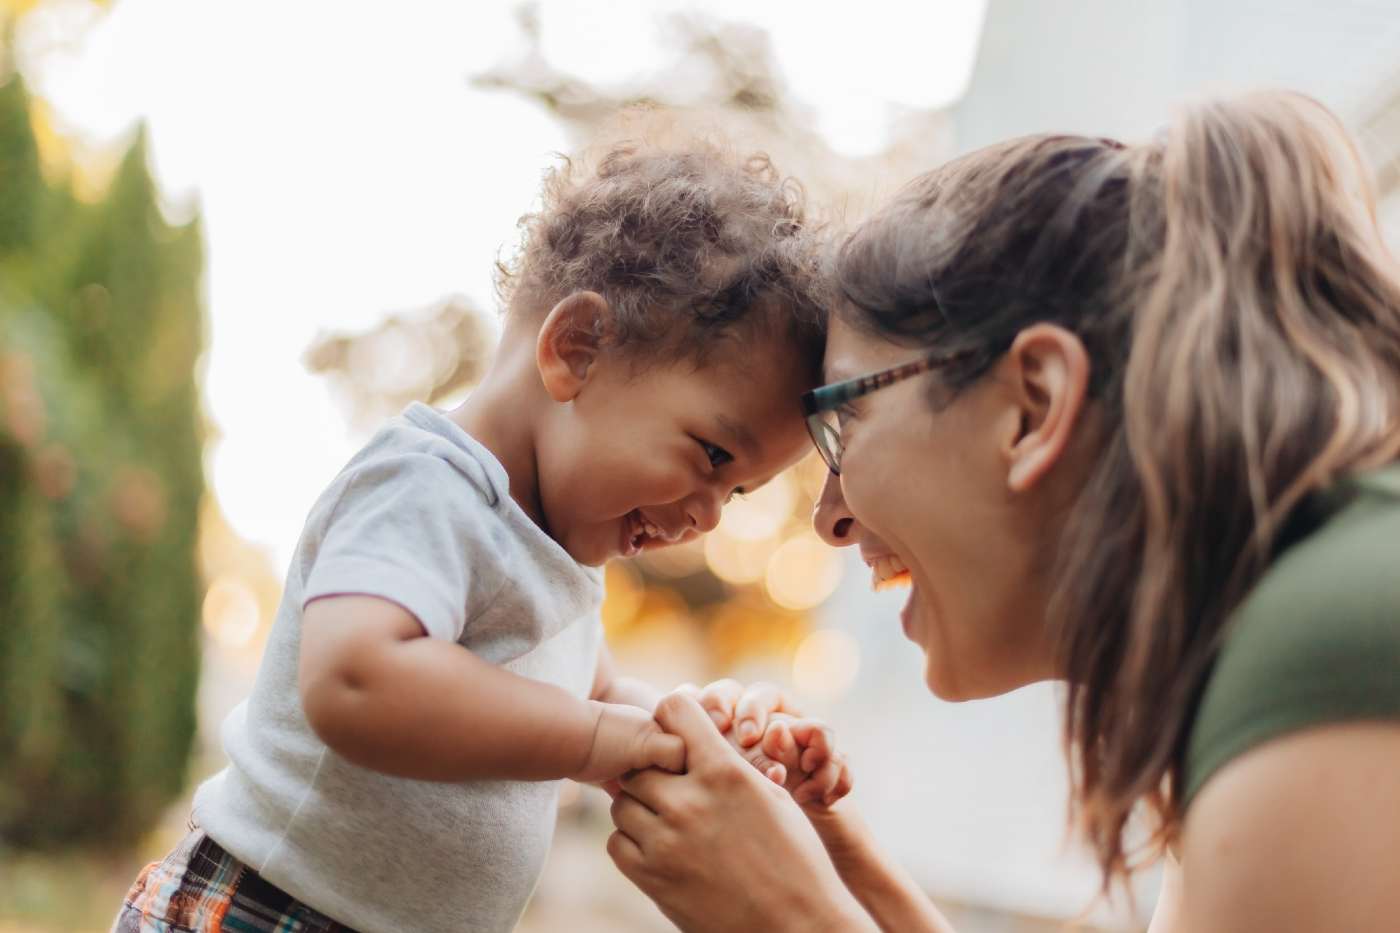 How to Talk to Your Toddler About Feeling Full